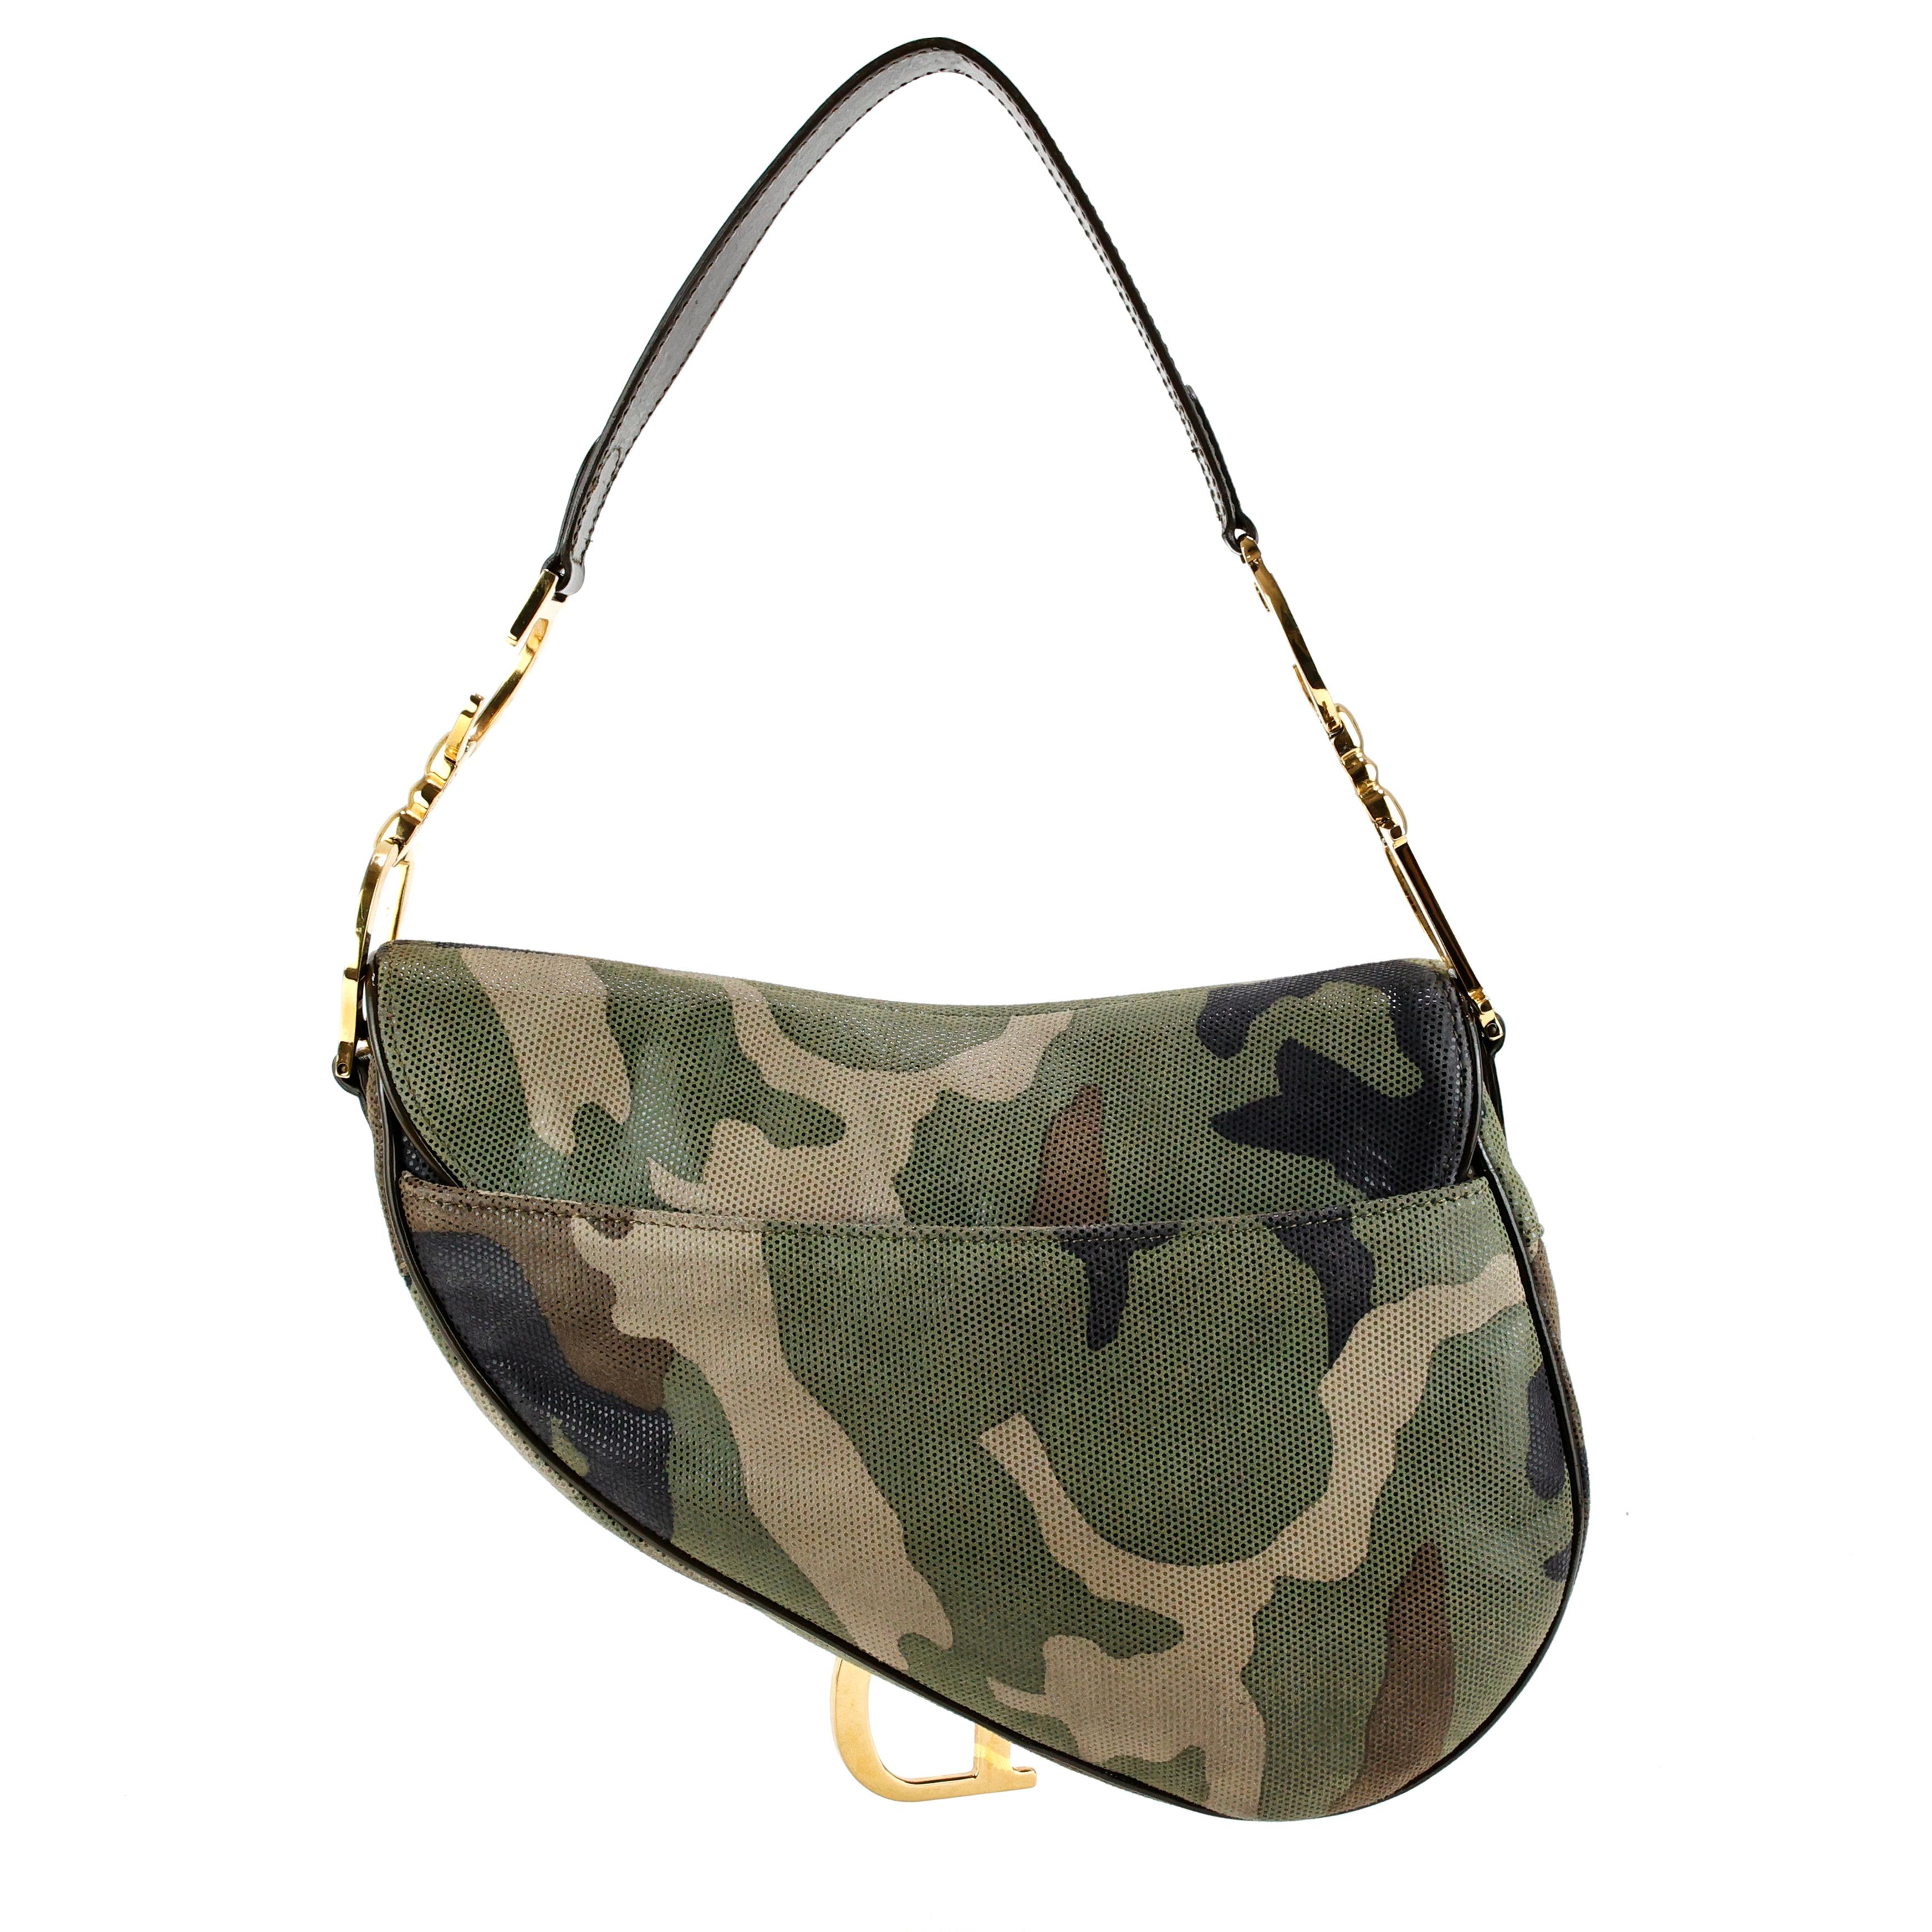 Rare Christian Dior by John Galliano 2000s Camouflage Saddle bag, in laminated leather, gold hardware featuring green sparkling details. 

Condition:
Really good.

Packing/accessories:
Dustbag.

Measurements:
25cm x 15cm x 6cm
